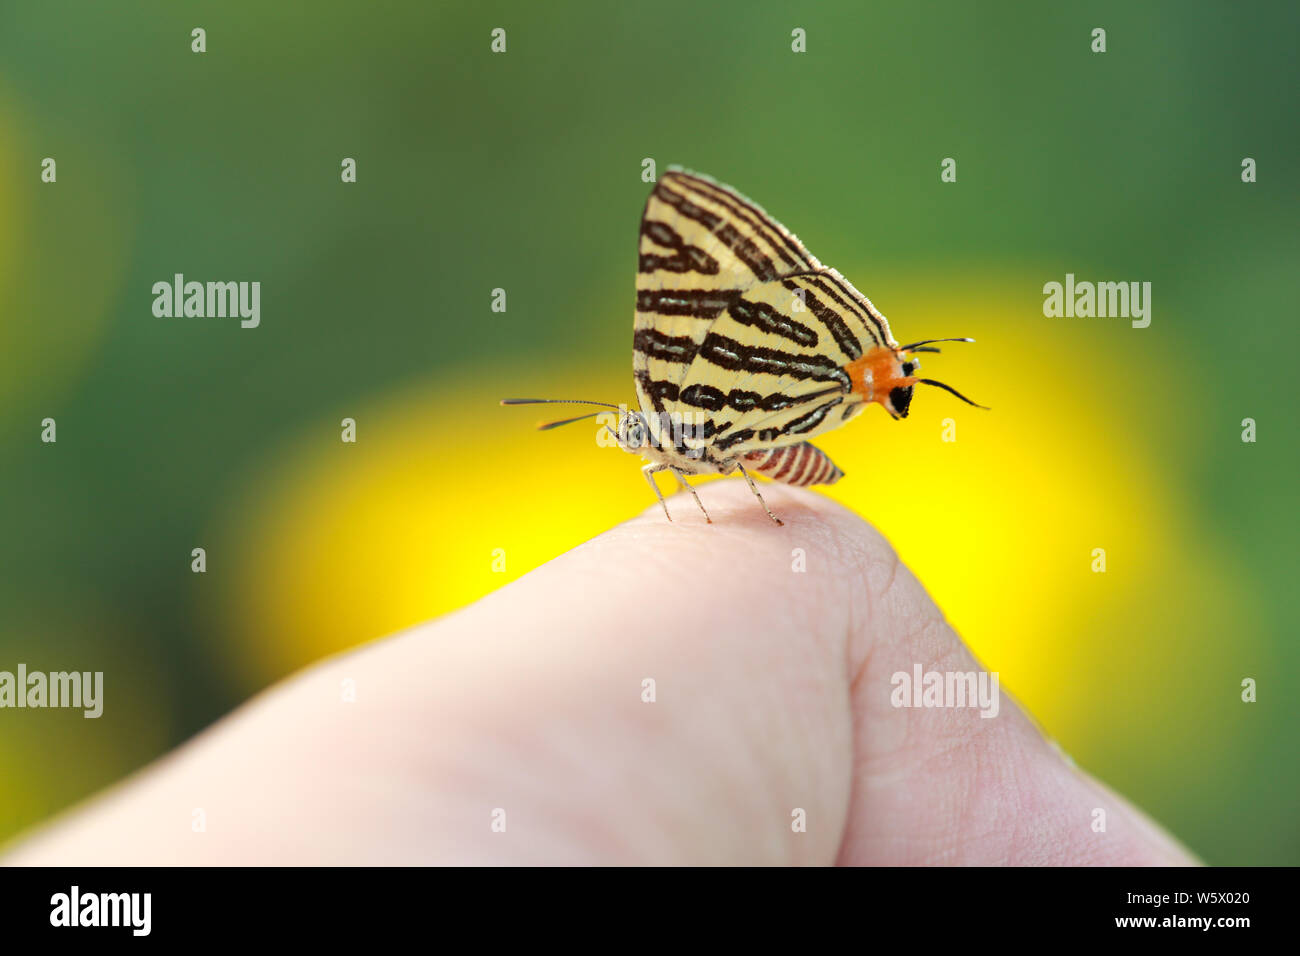 macro image of beautiful butterfly on human finger with yellow and green background in nature Stock Photo